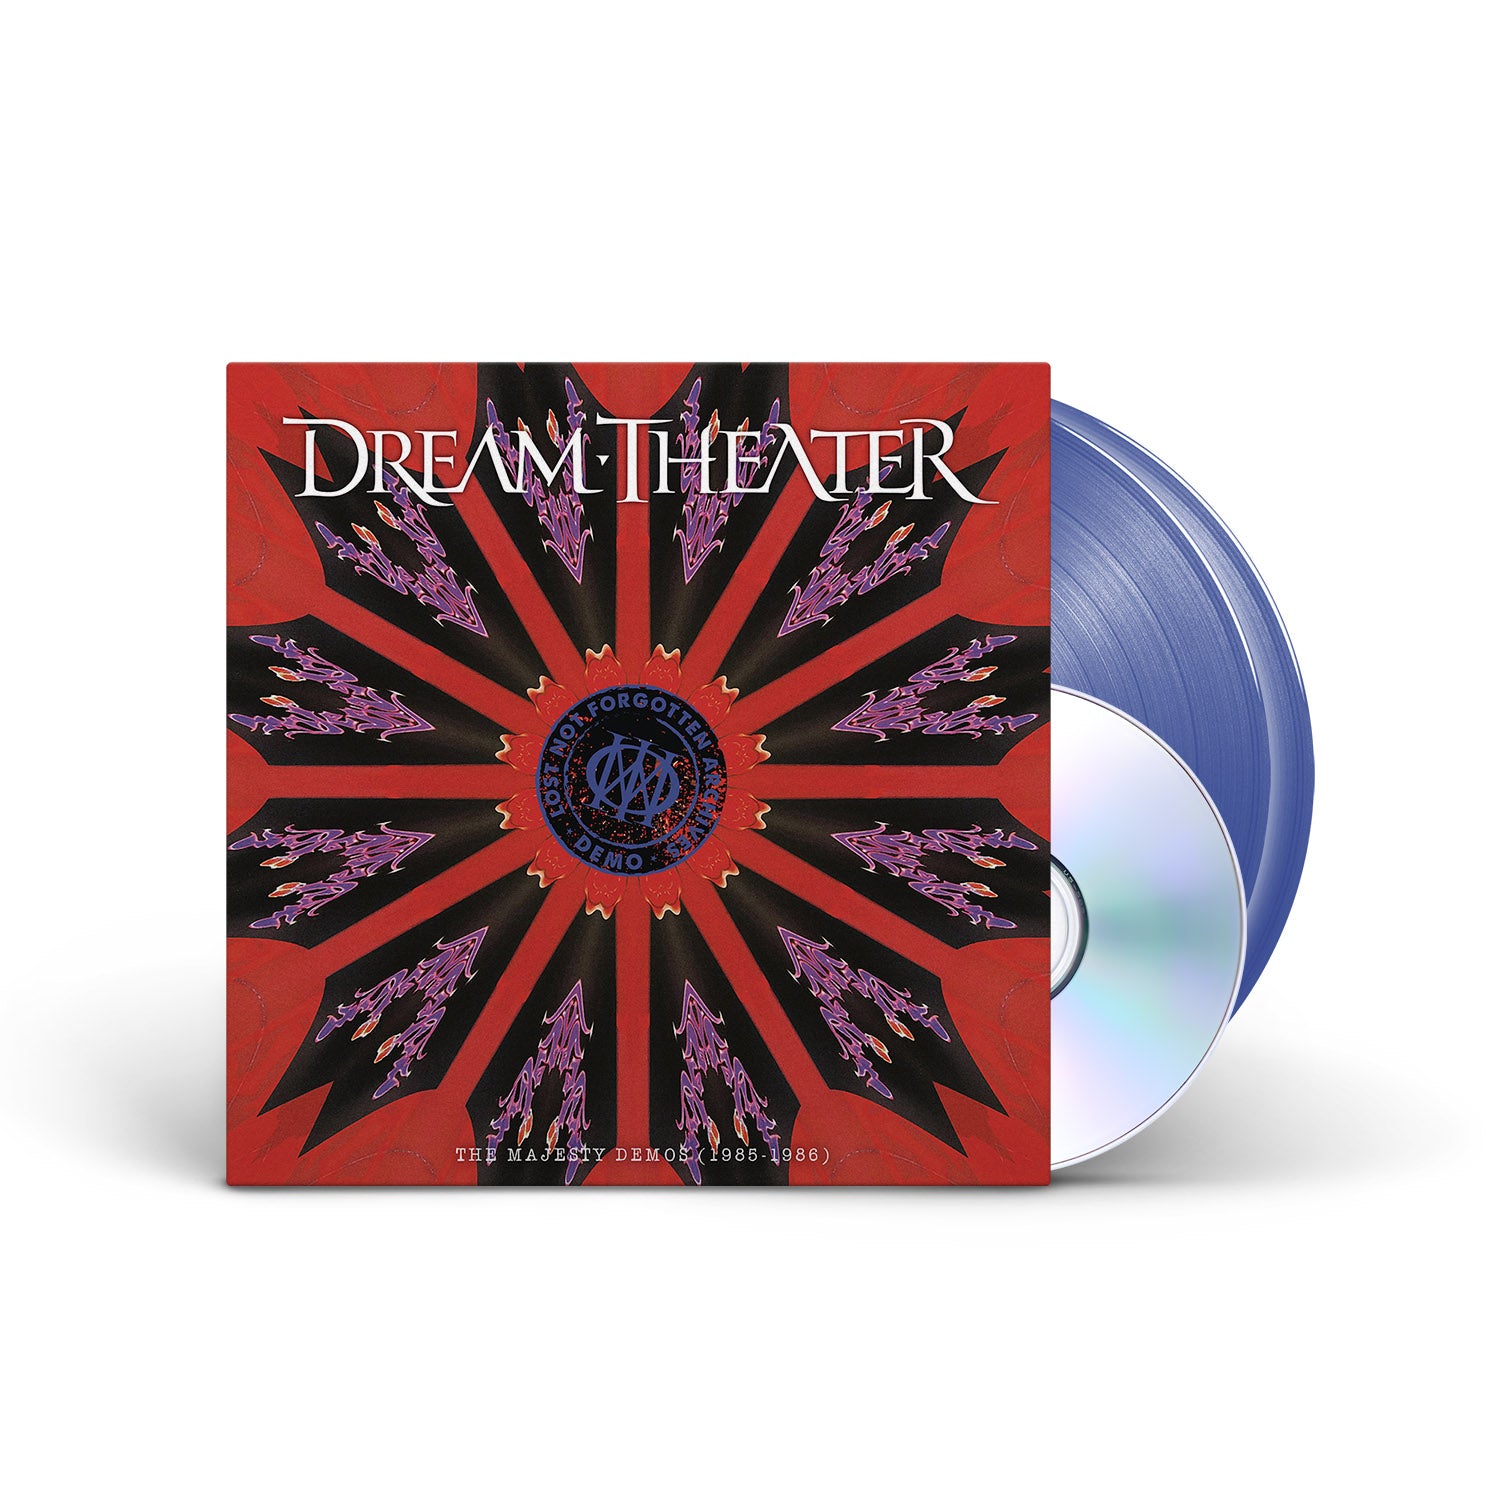 DREAM THEATER - Lost Not Forgotten Archives: The Majesty Demos (1985-1986) - Cobalt 2xLP + CD